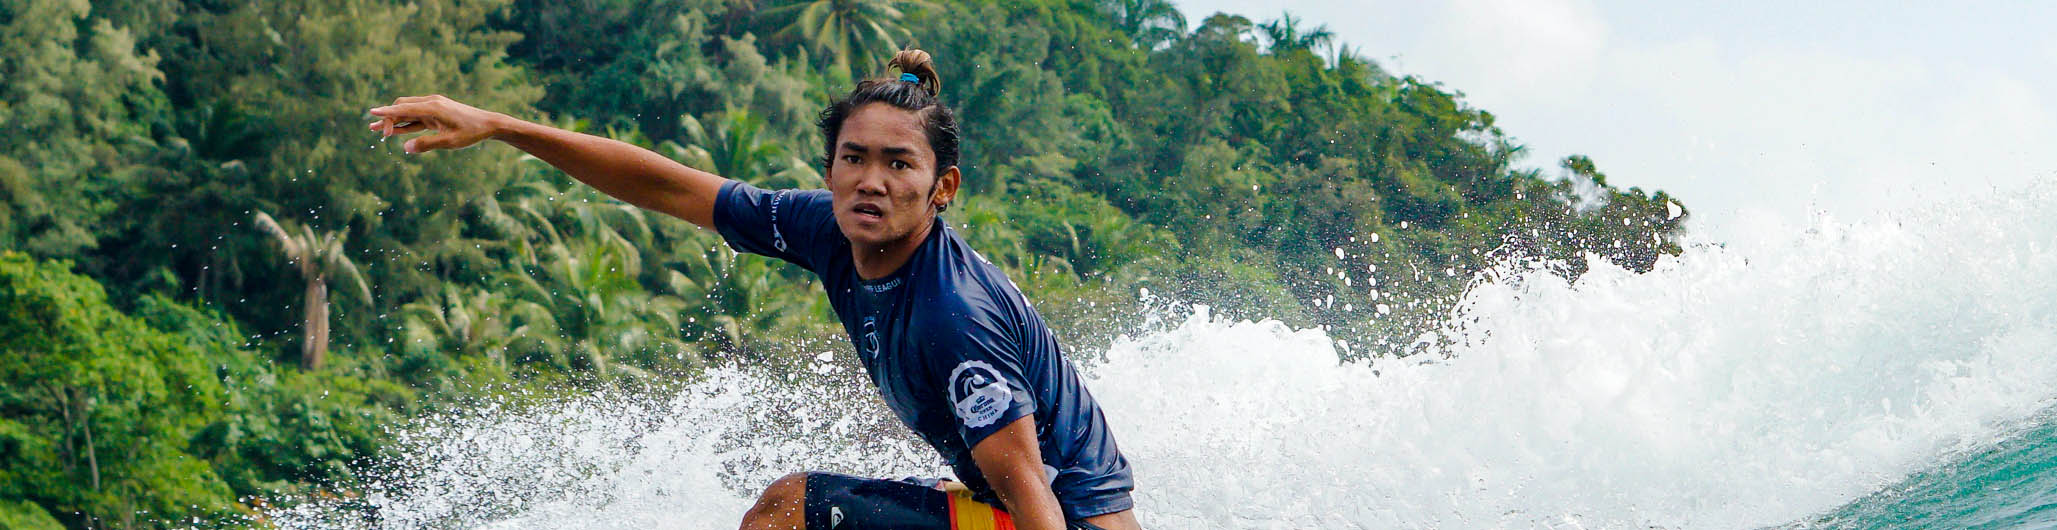 Surfing Still on the Hunt for Olympic Slot - Indonesia Olympic Commitee